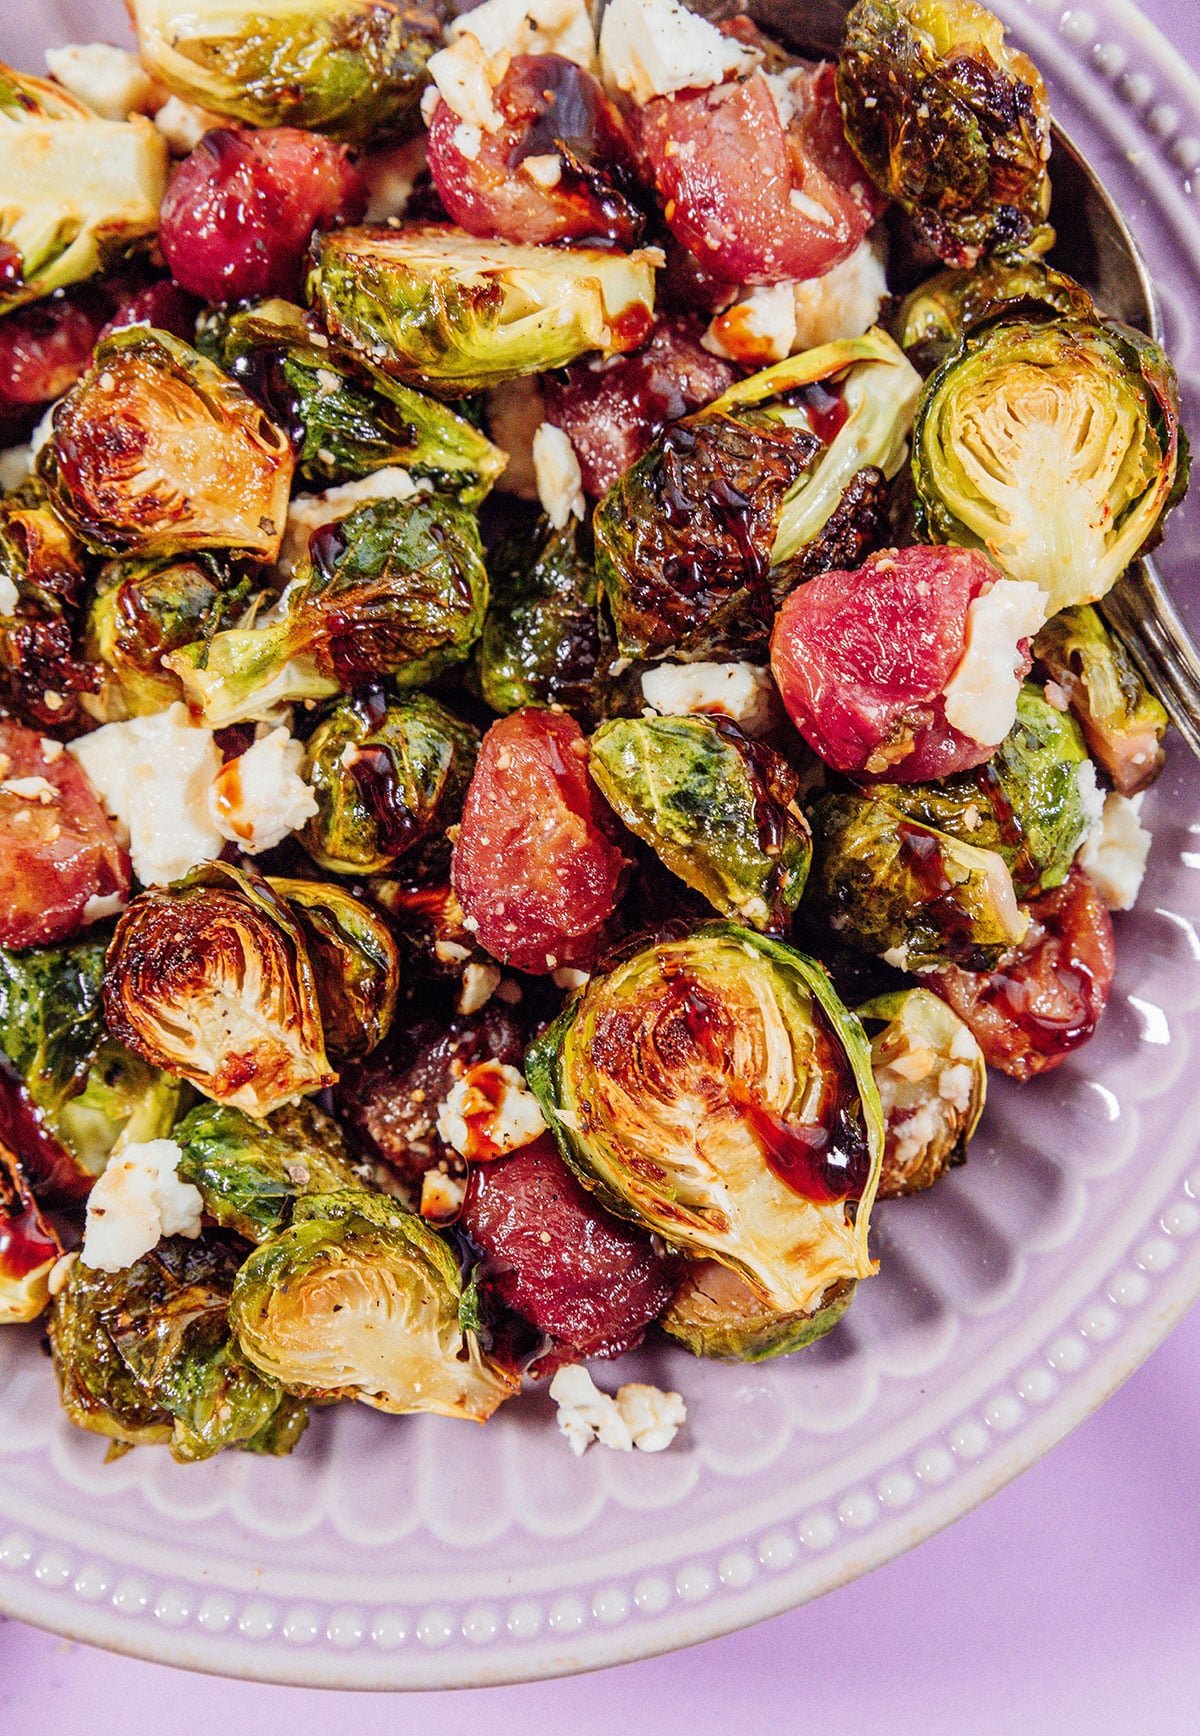 Roasted Brussels sprouts with grapes on a plate.